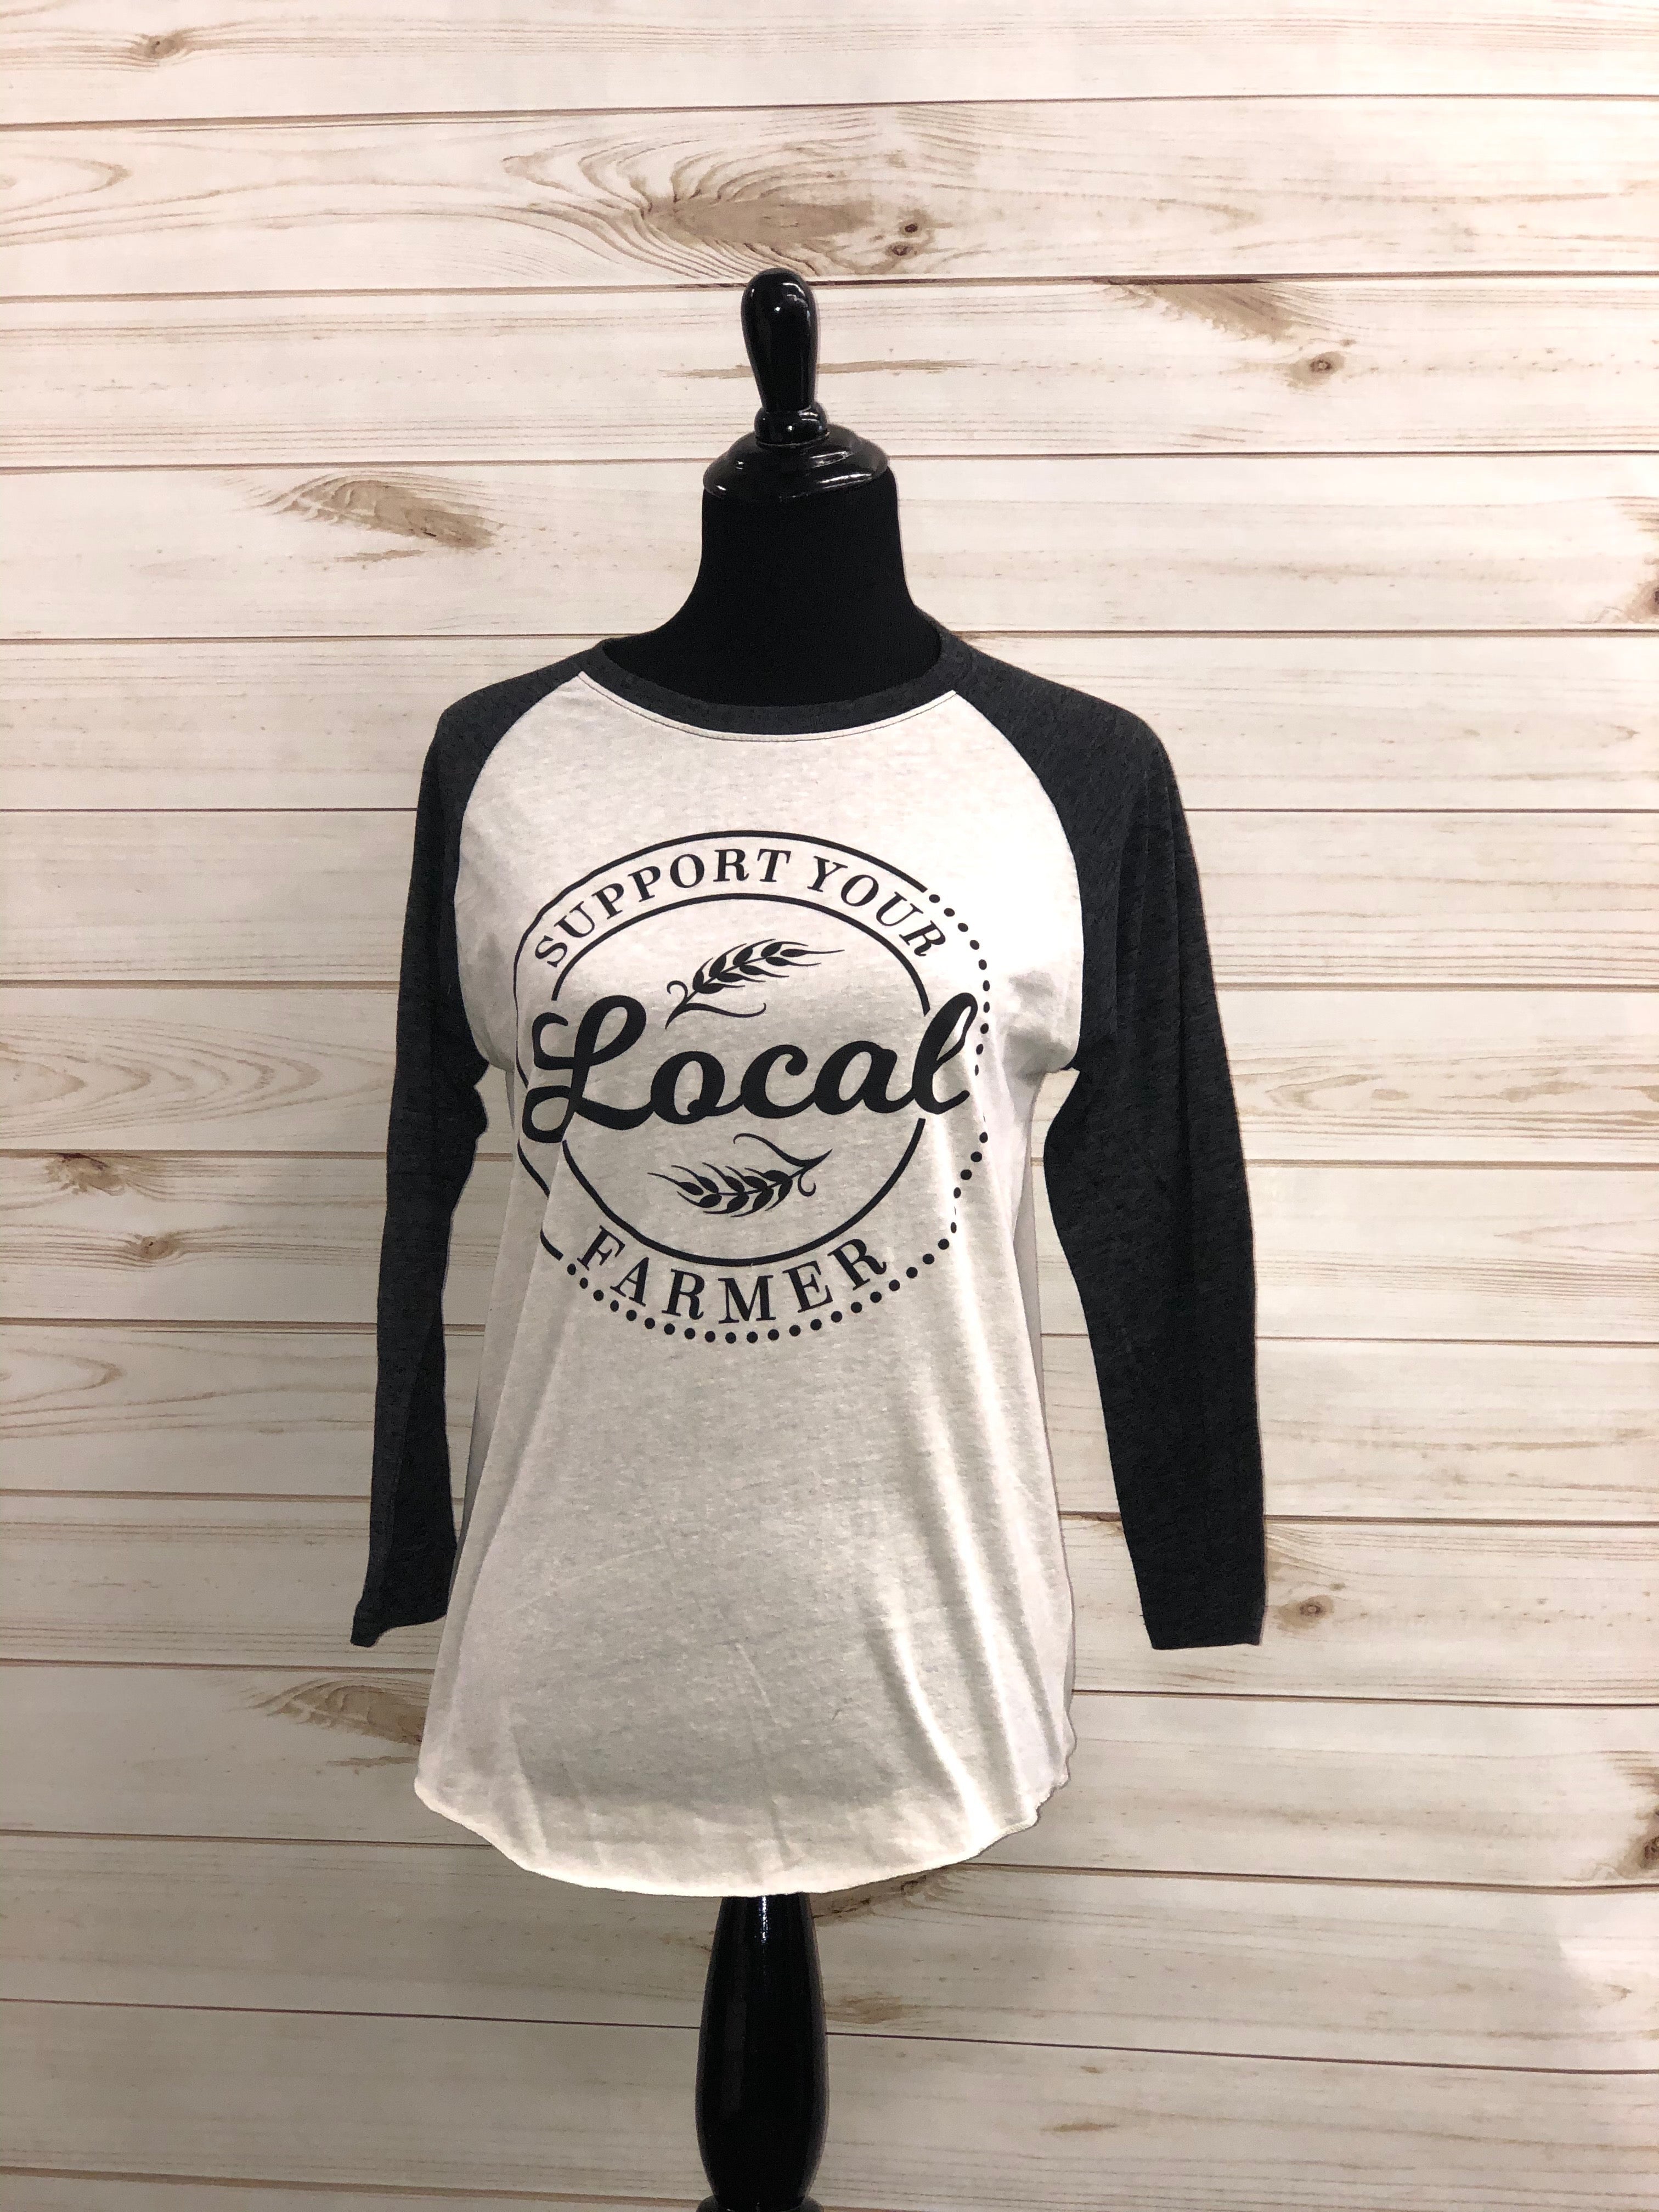 Support Your Local Farmers - Raglan Tee